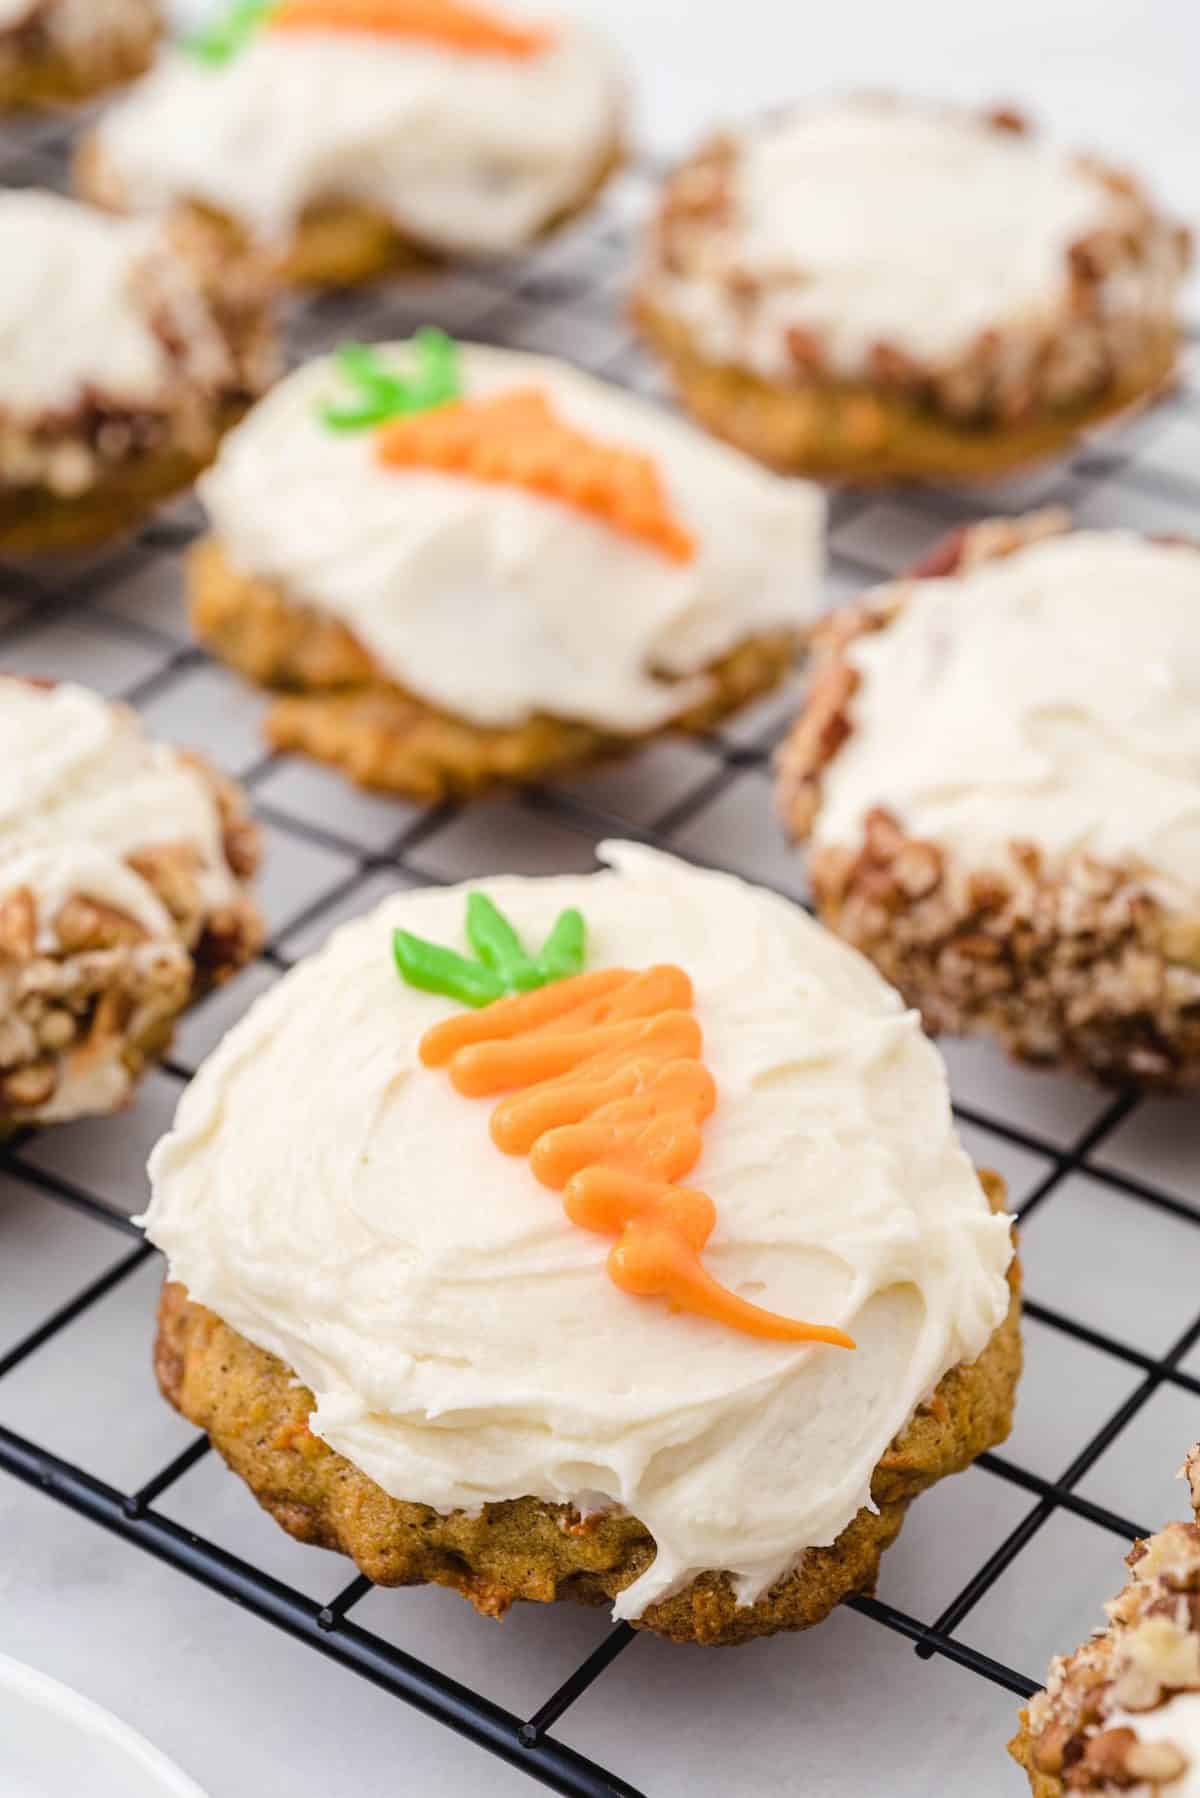 Carrot Cake Cookies With Cream Cheese Frosting - Princess Pinky Girl